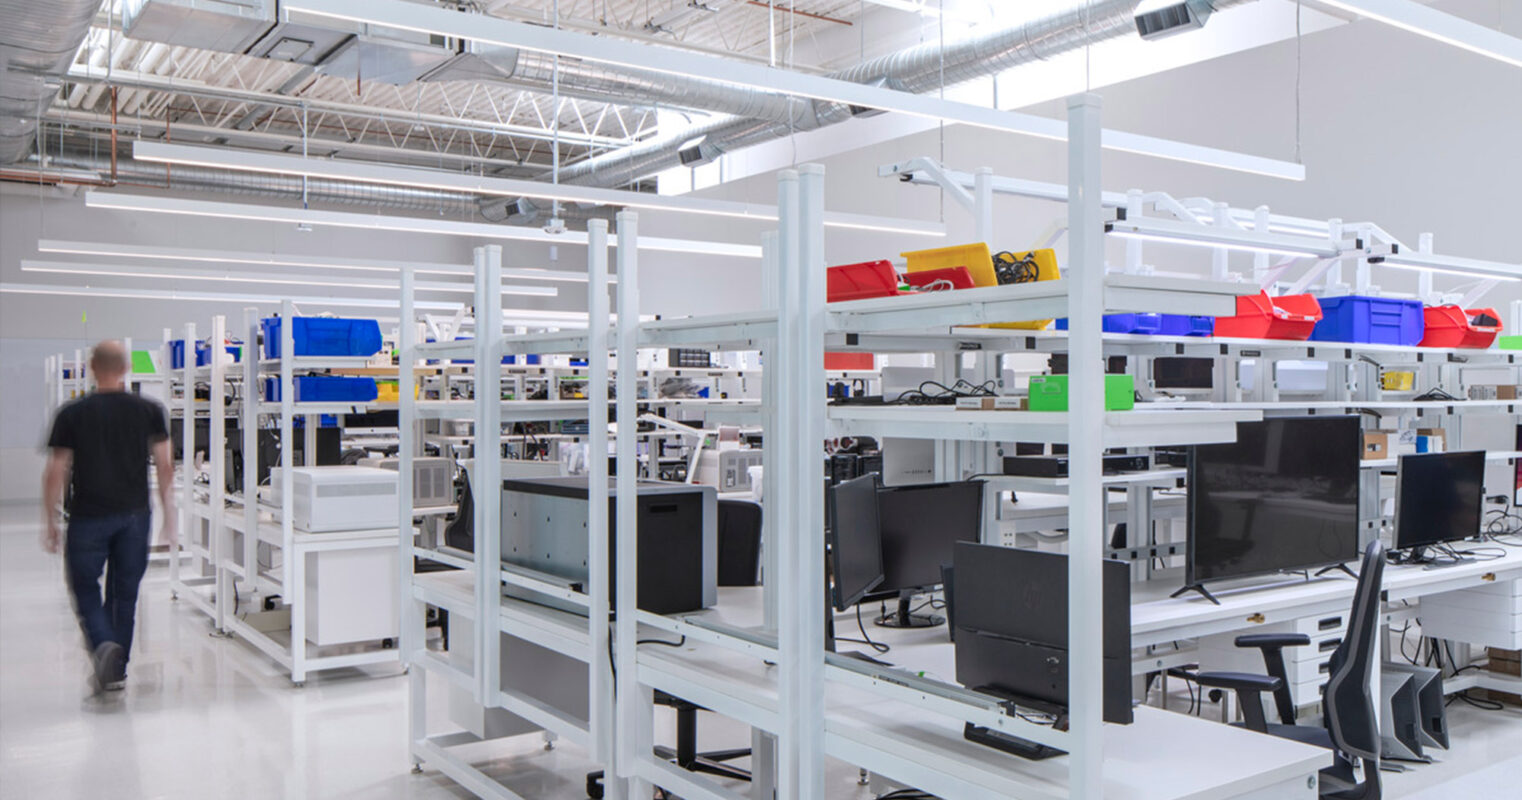 Interior, technical lab space at Belkin, California